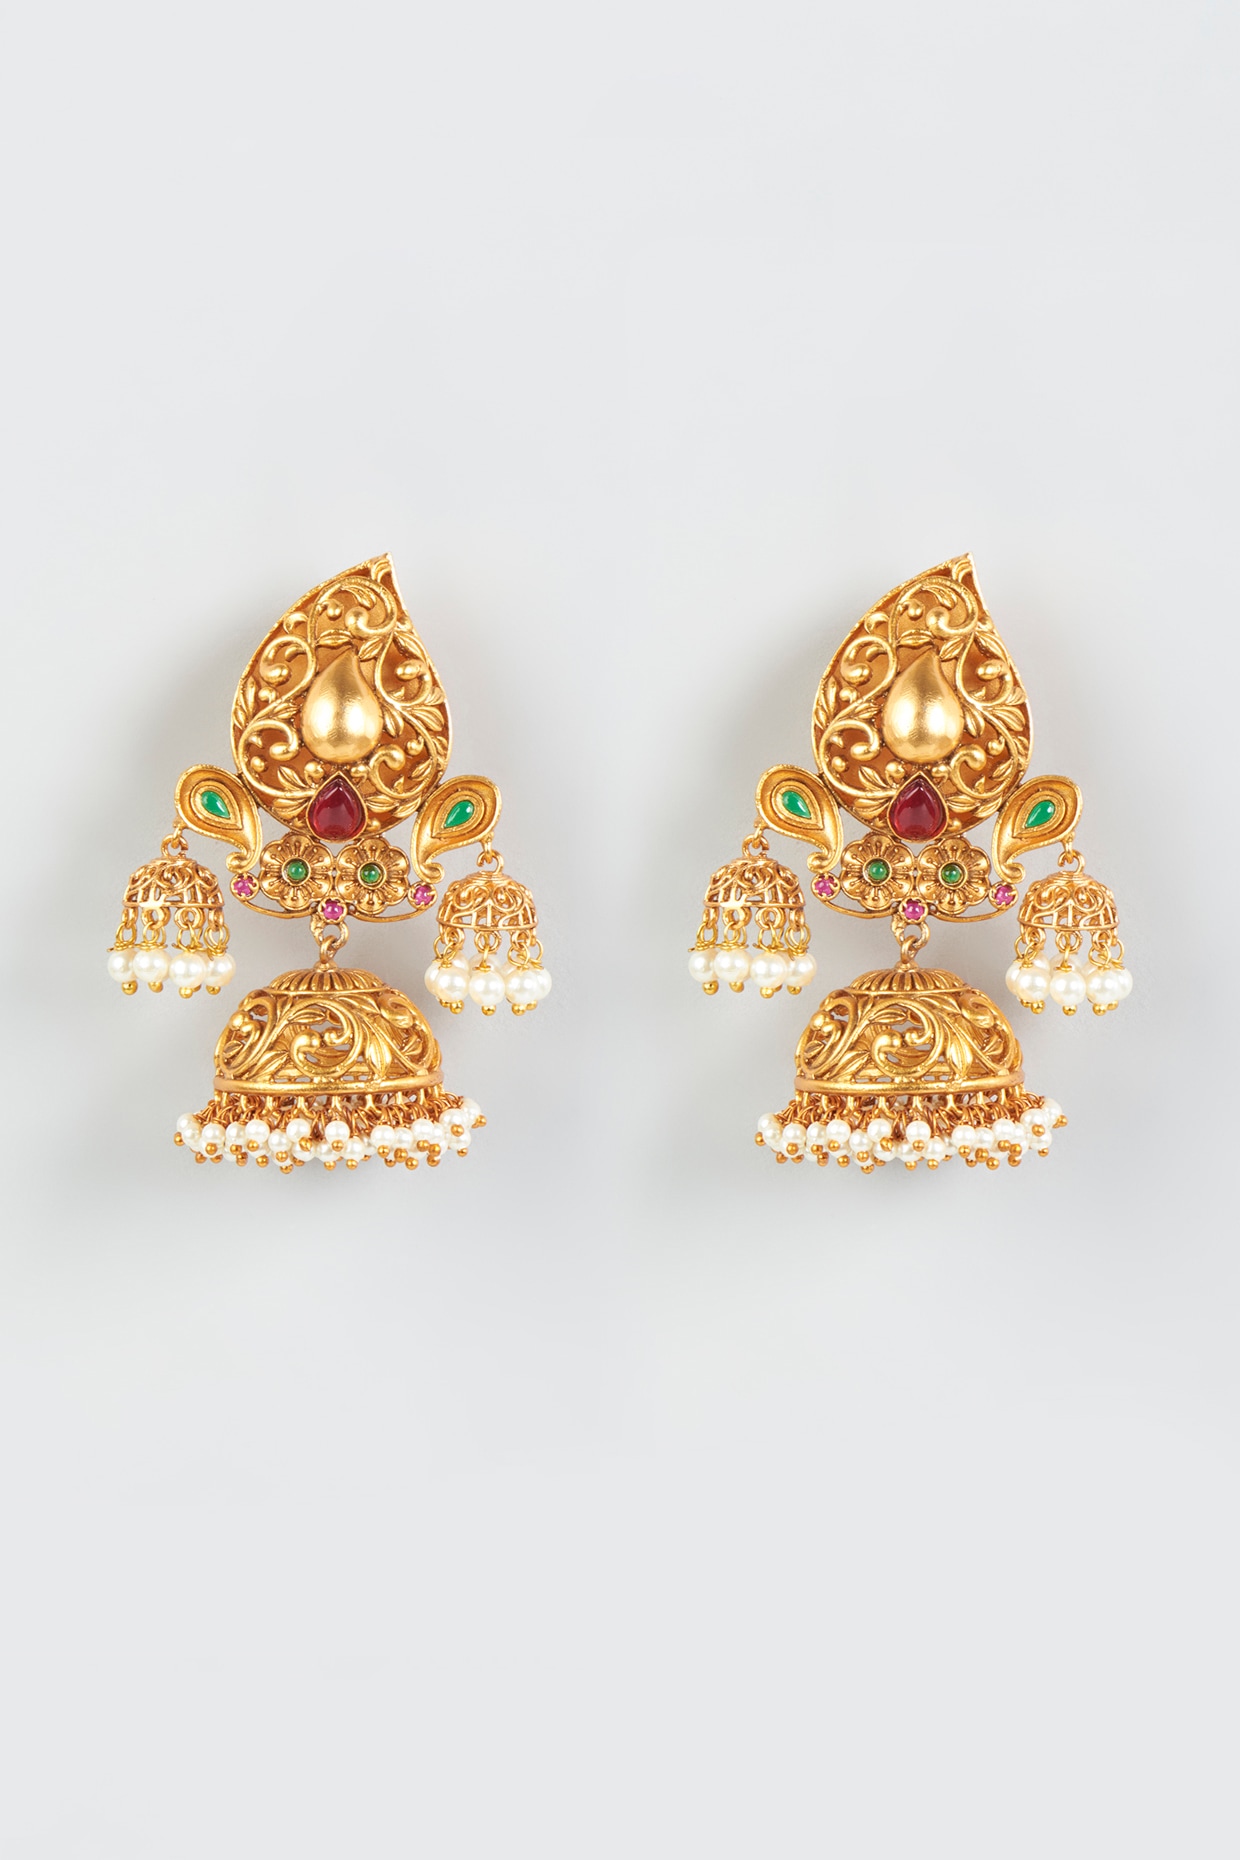 Buy MEENAZ Traditional Temple One Gram Gold Brass Copper South Indian Screw  Back Studs Meenakari Stone Ear Chains Hair Peacock Jhumkas Jhumka Earrings  Combo for Women Girls Wedding chain -GOLD JHUMKI-M115 Online